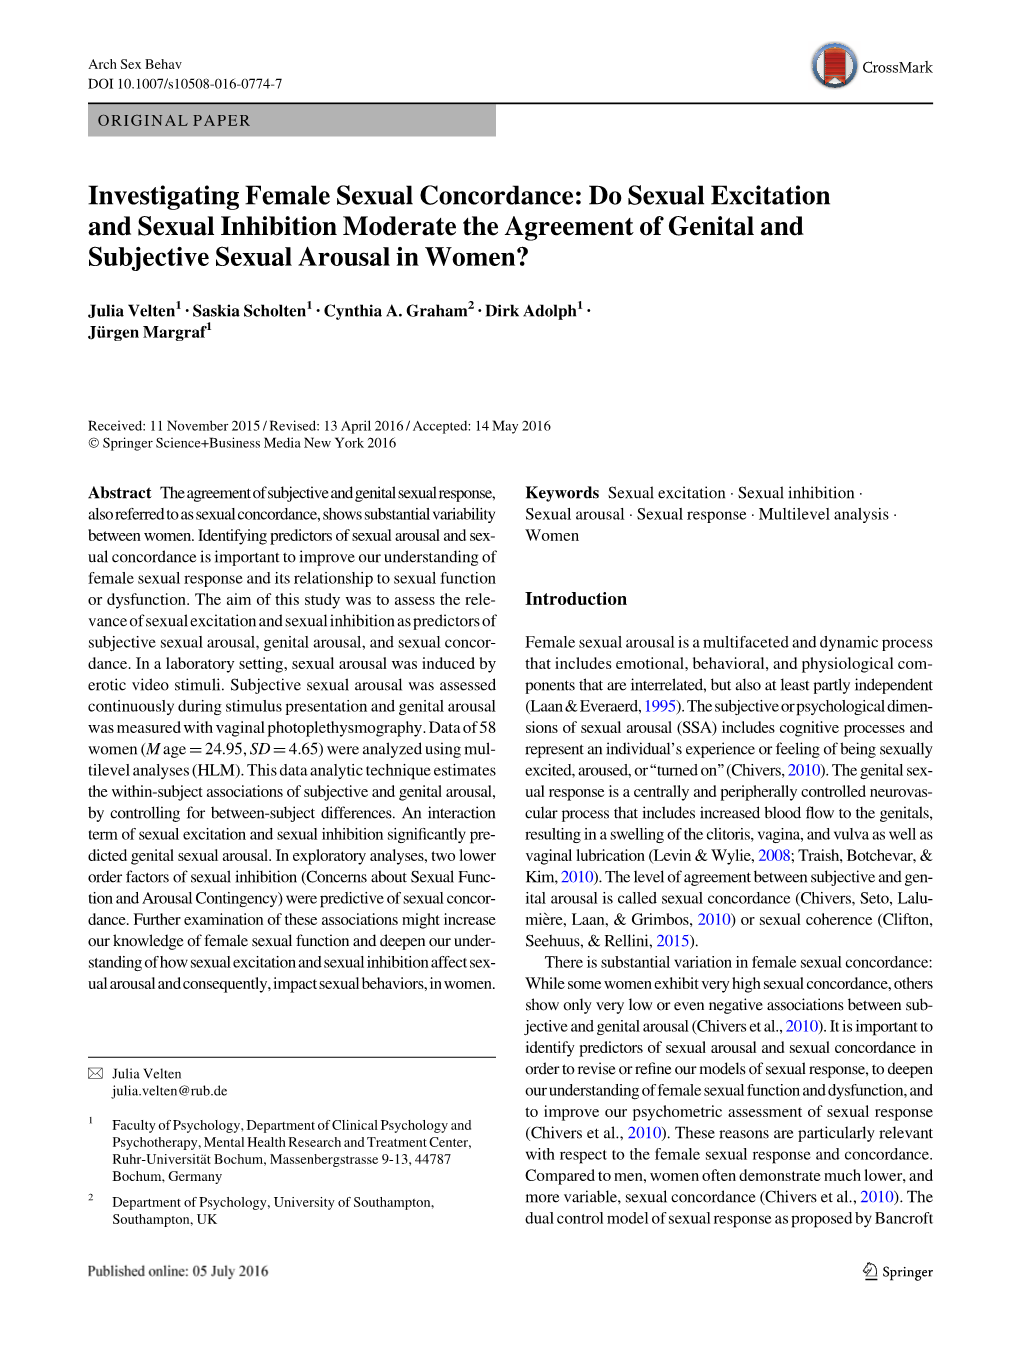 Investigating Female Sexual Concordance: Do Sexual Excitation and Sexual Inhibition Moderate the Agreement of Genital and Subjective Sexual Arousal in Women?